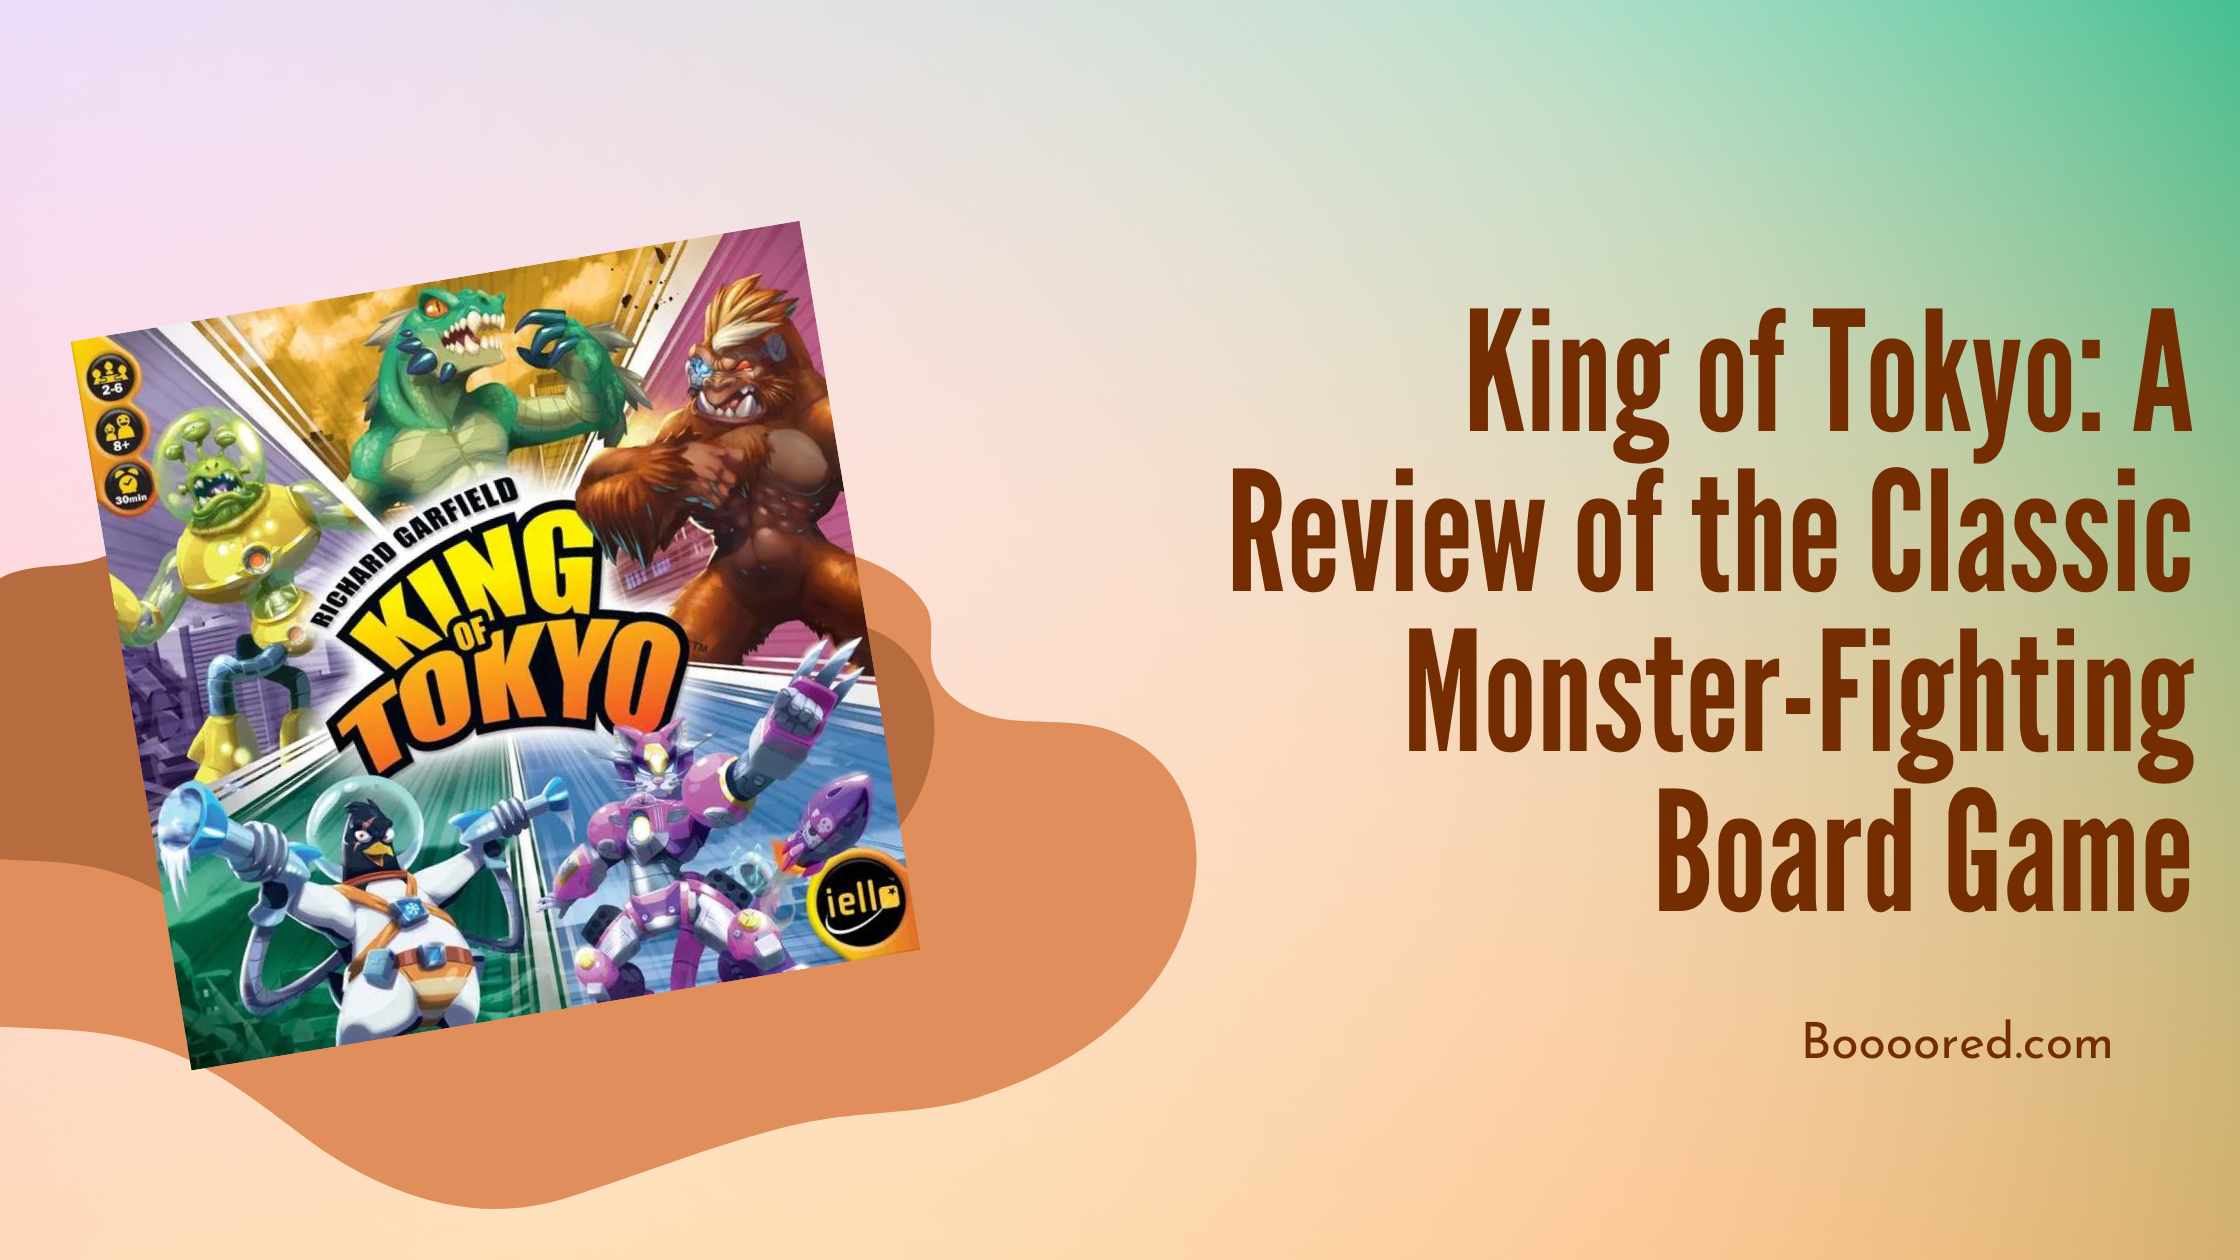 King of Tokyo: A Review of the Classic Monster-Fighting Board Game